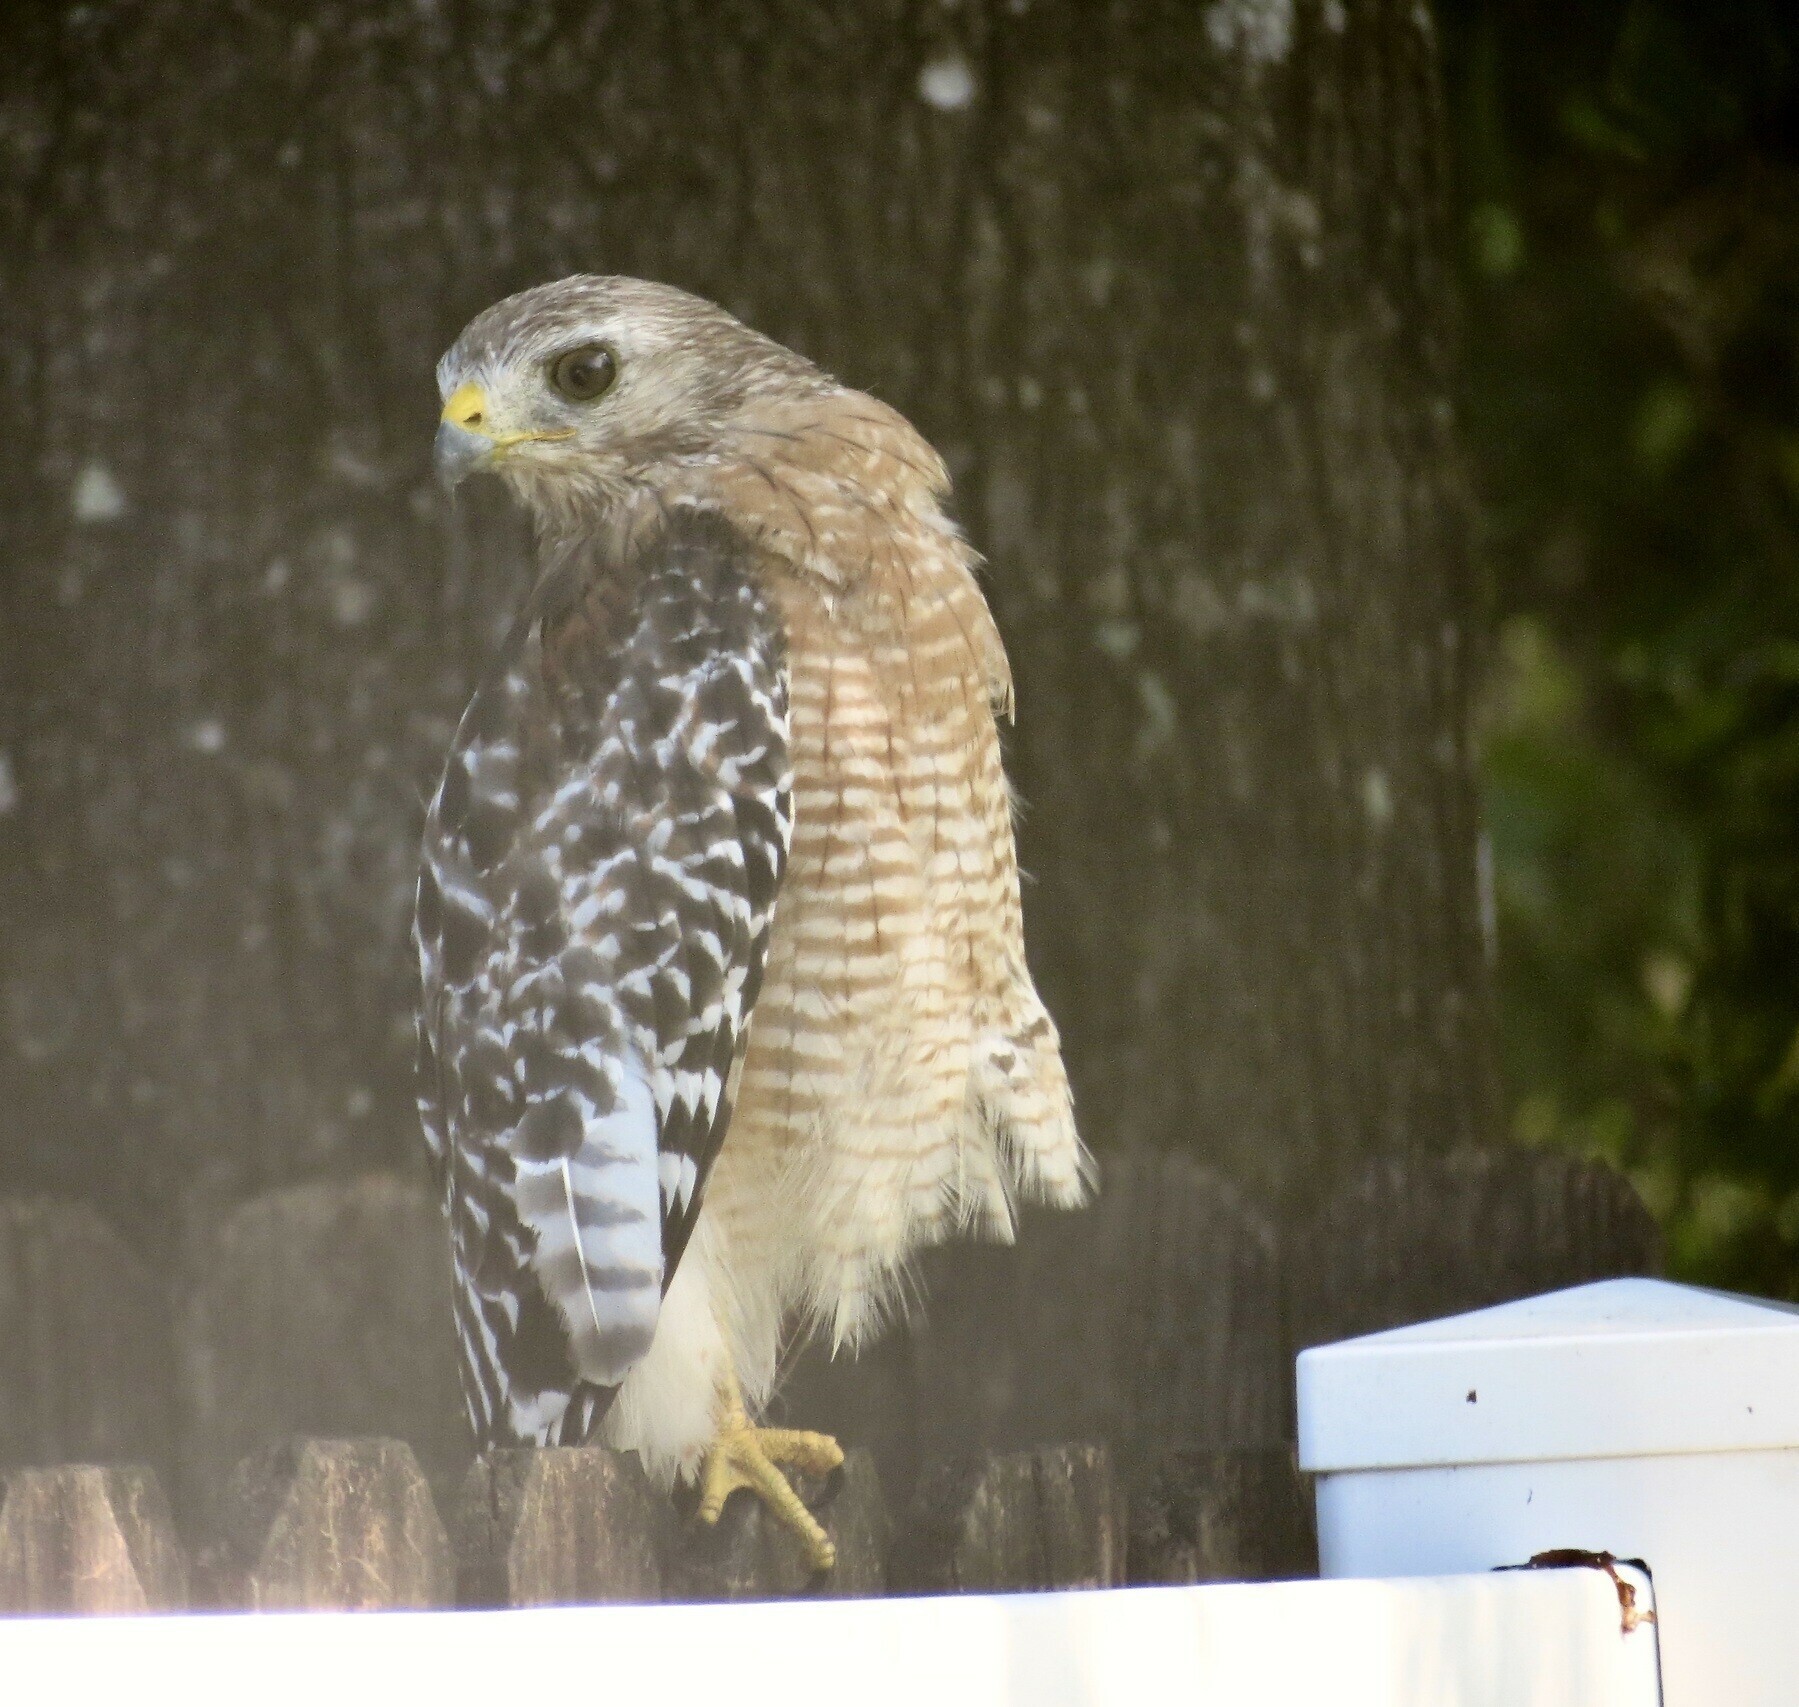 A red-shouldered hawk sits on a wood and vinyl fence surveying a backyard.